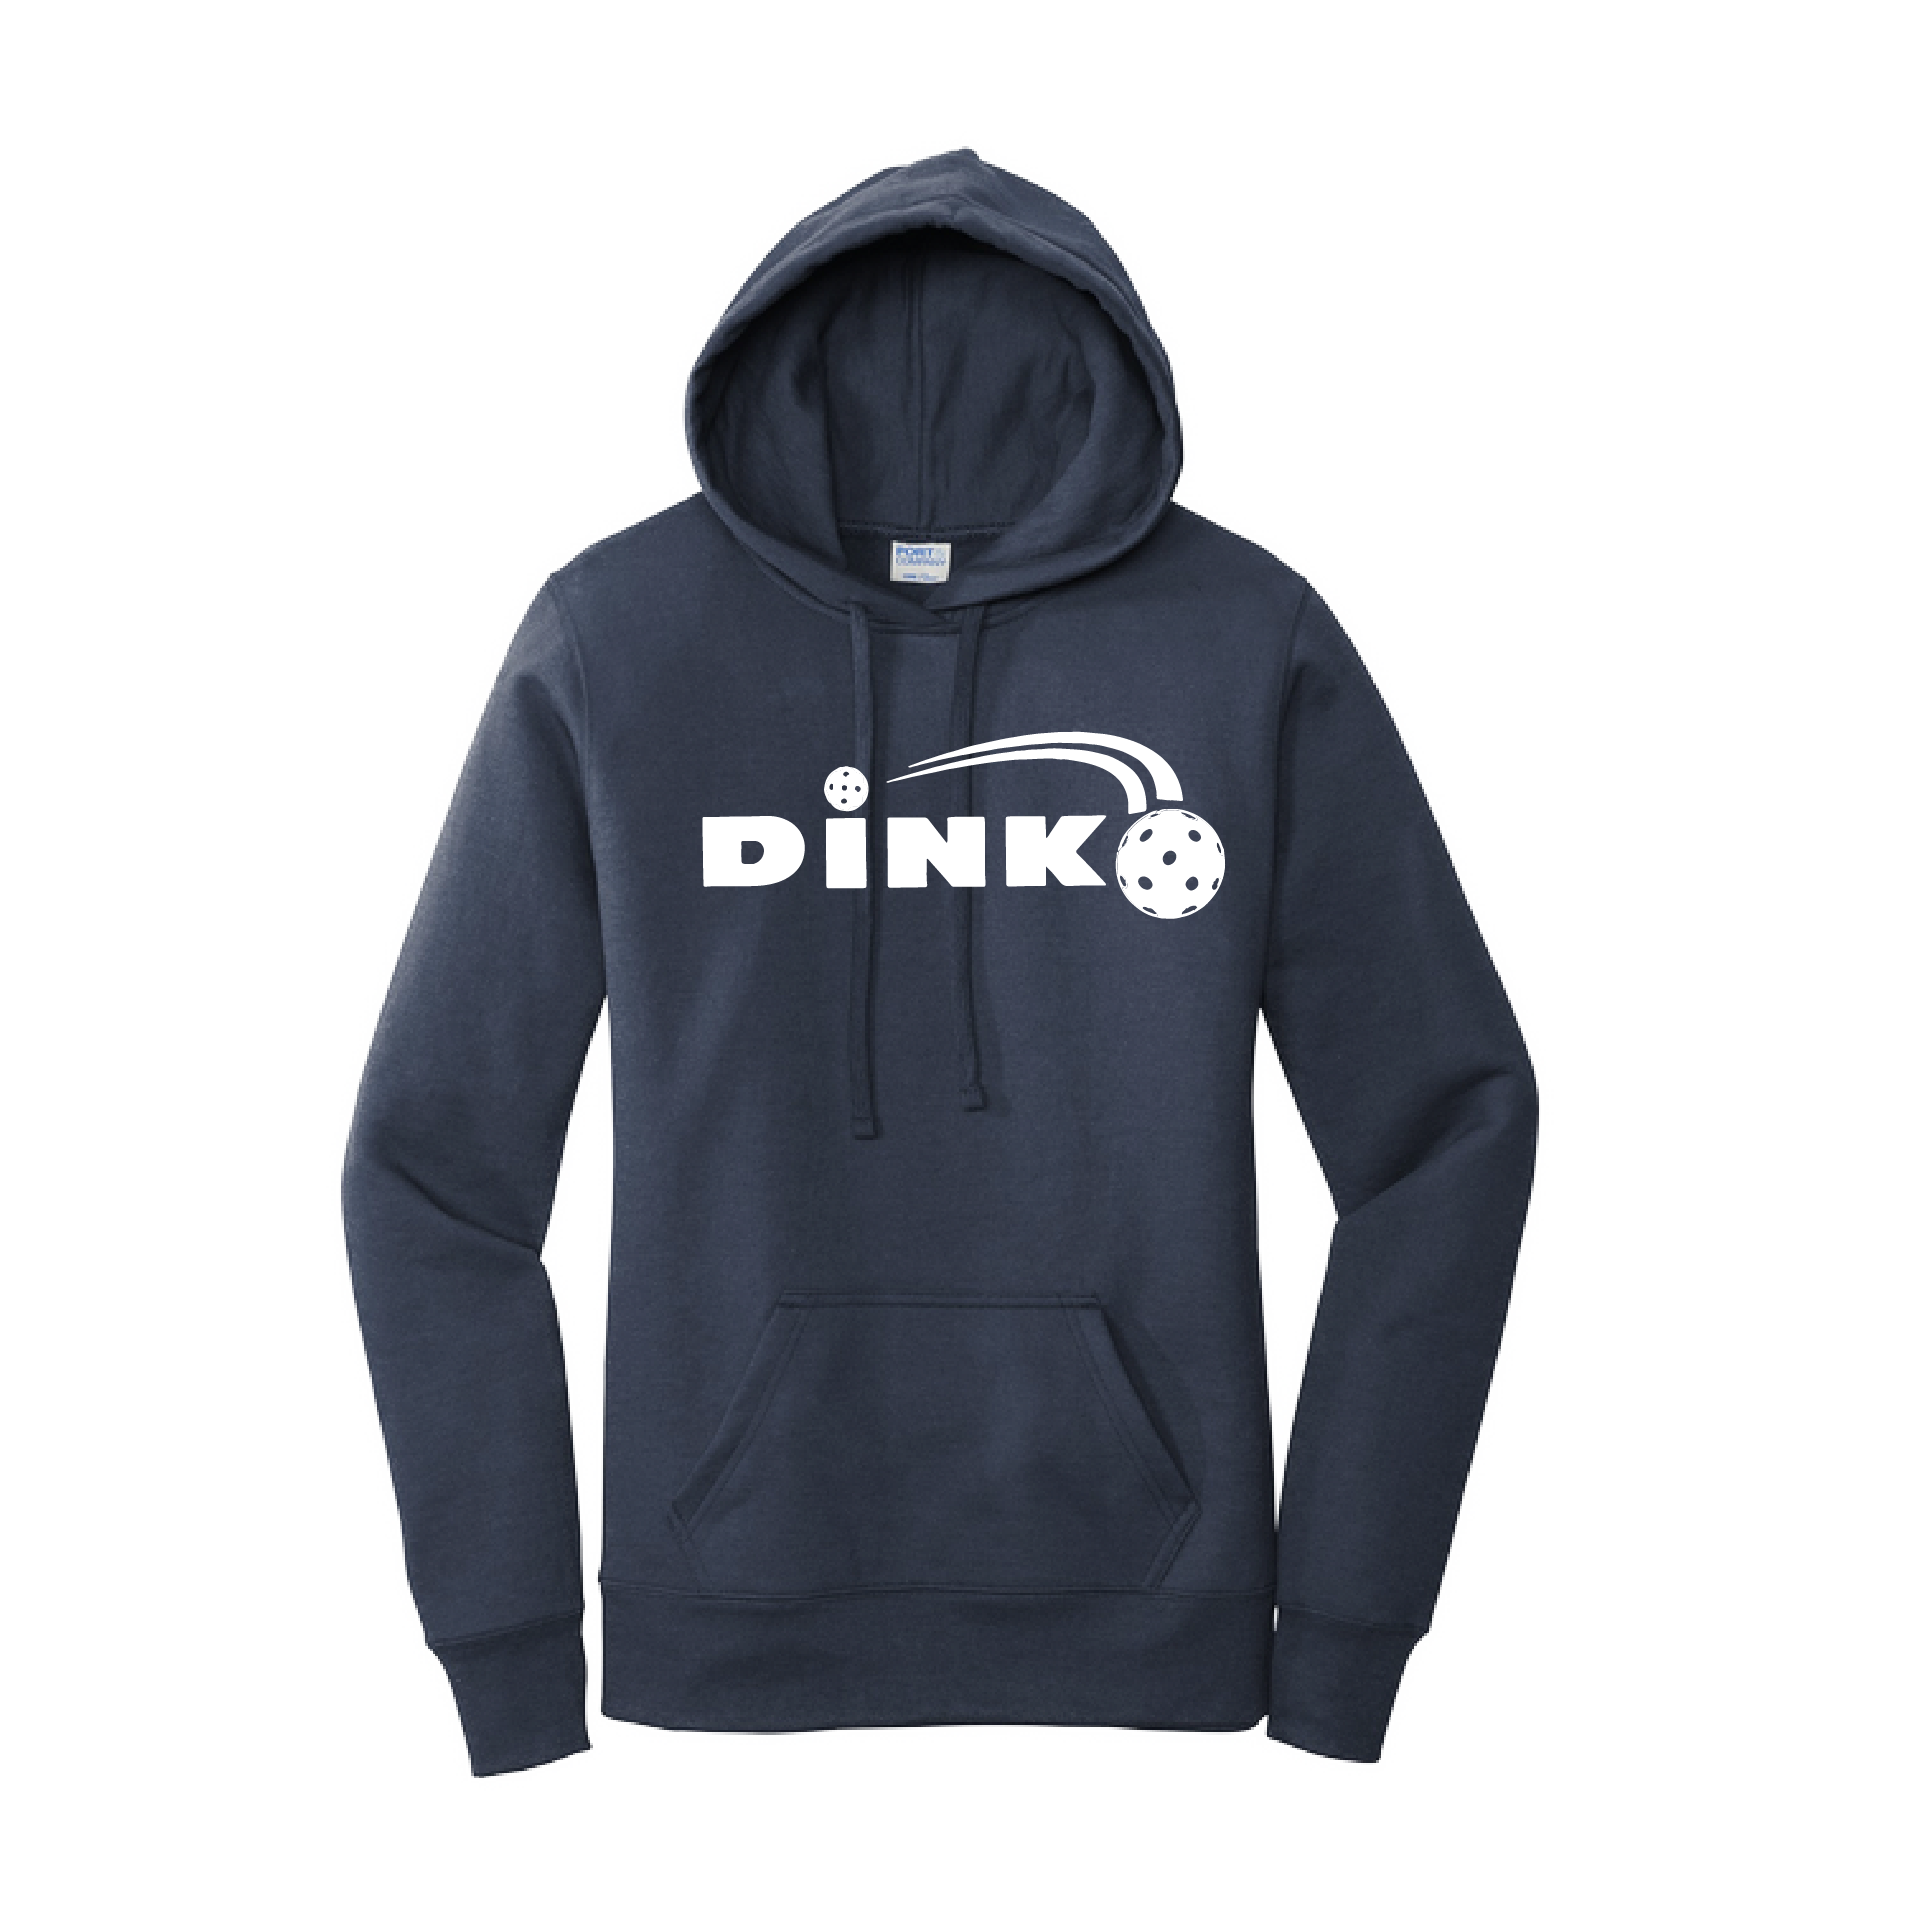 Pickleball Design: Dink  Women's Hooded Pullover Sweatshirt  Turn up the volume in this Women's Sweatshirts with its perfect mix of softness and attitude. Ultra soft lined inside with a lined hood also. This is fitted nicely for a women's figure. Front pouch pocket.